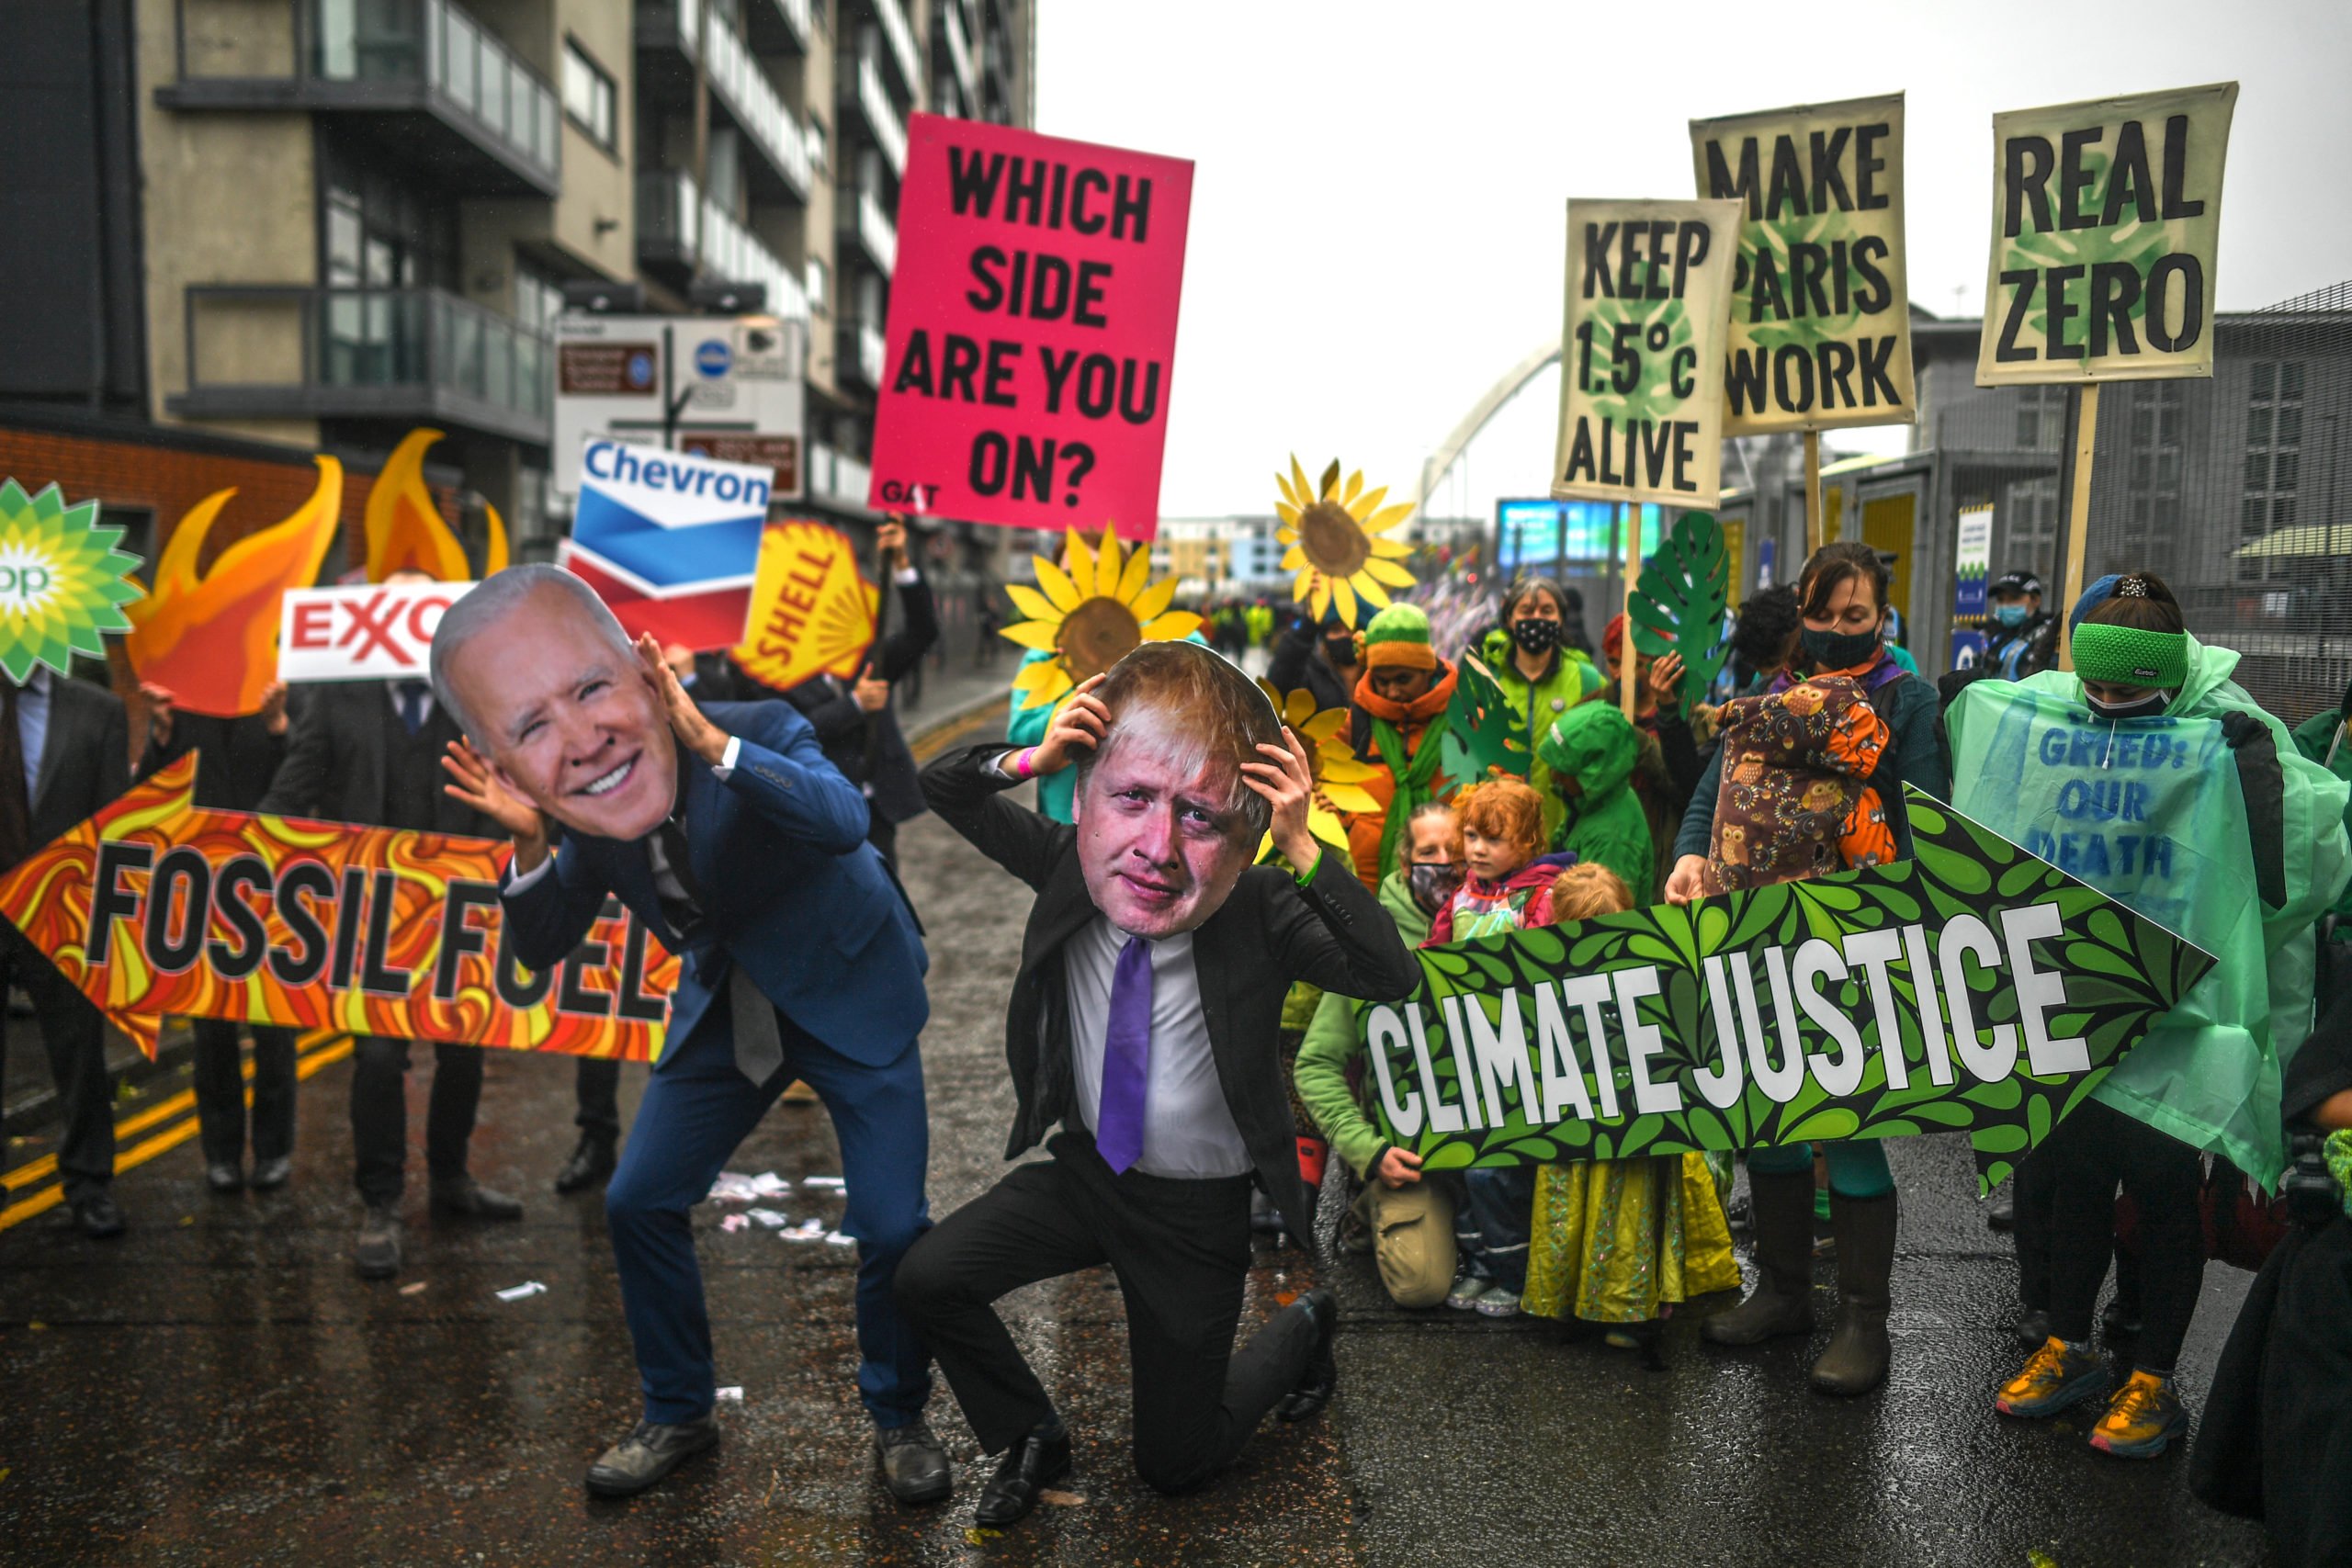 Protesters wearing masks of Boris Johnson and Joe Biden protest outside the entrance to the COP26 conference on Nov. 12 in Glasgow, United Kingdom. (Peter Summers/Getty Images)